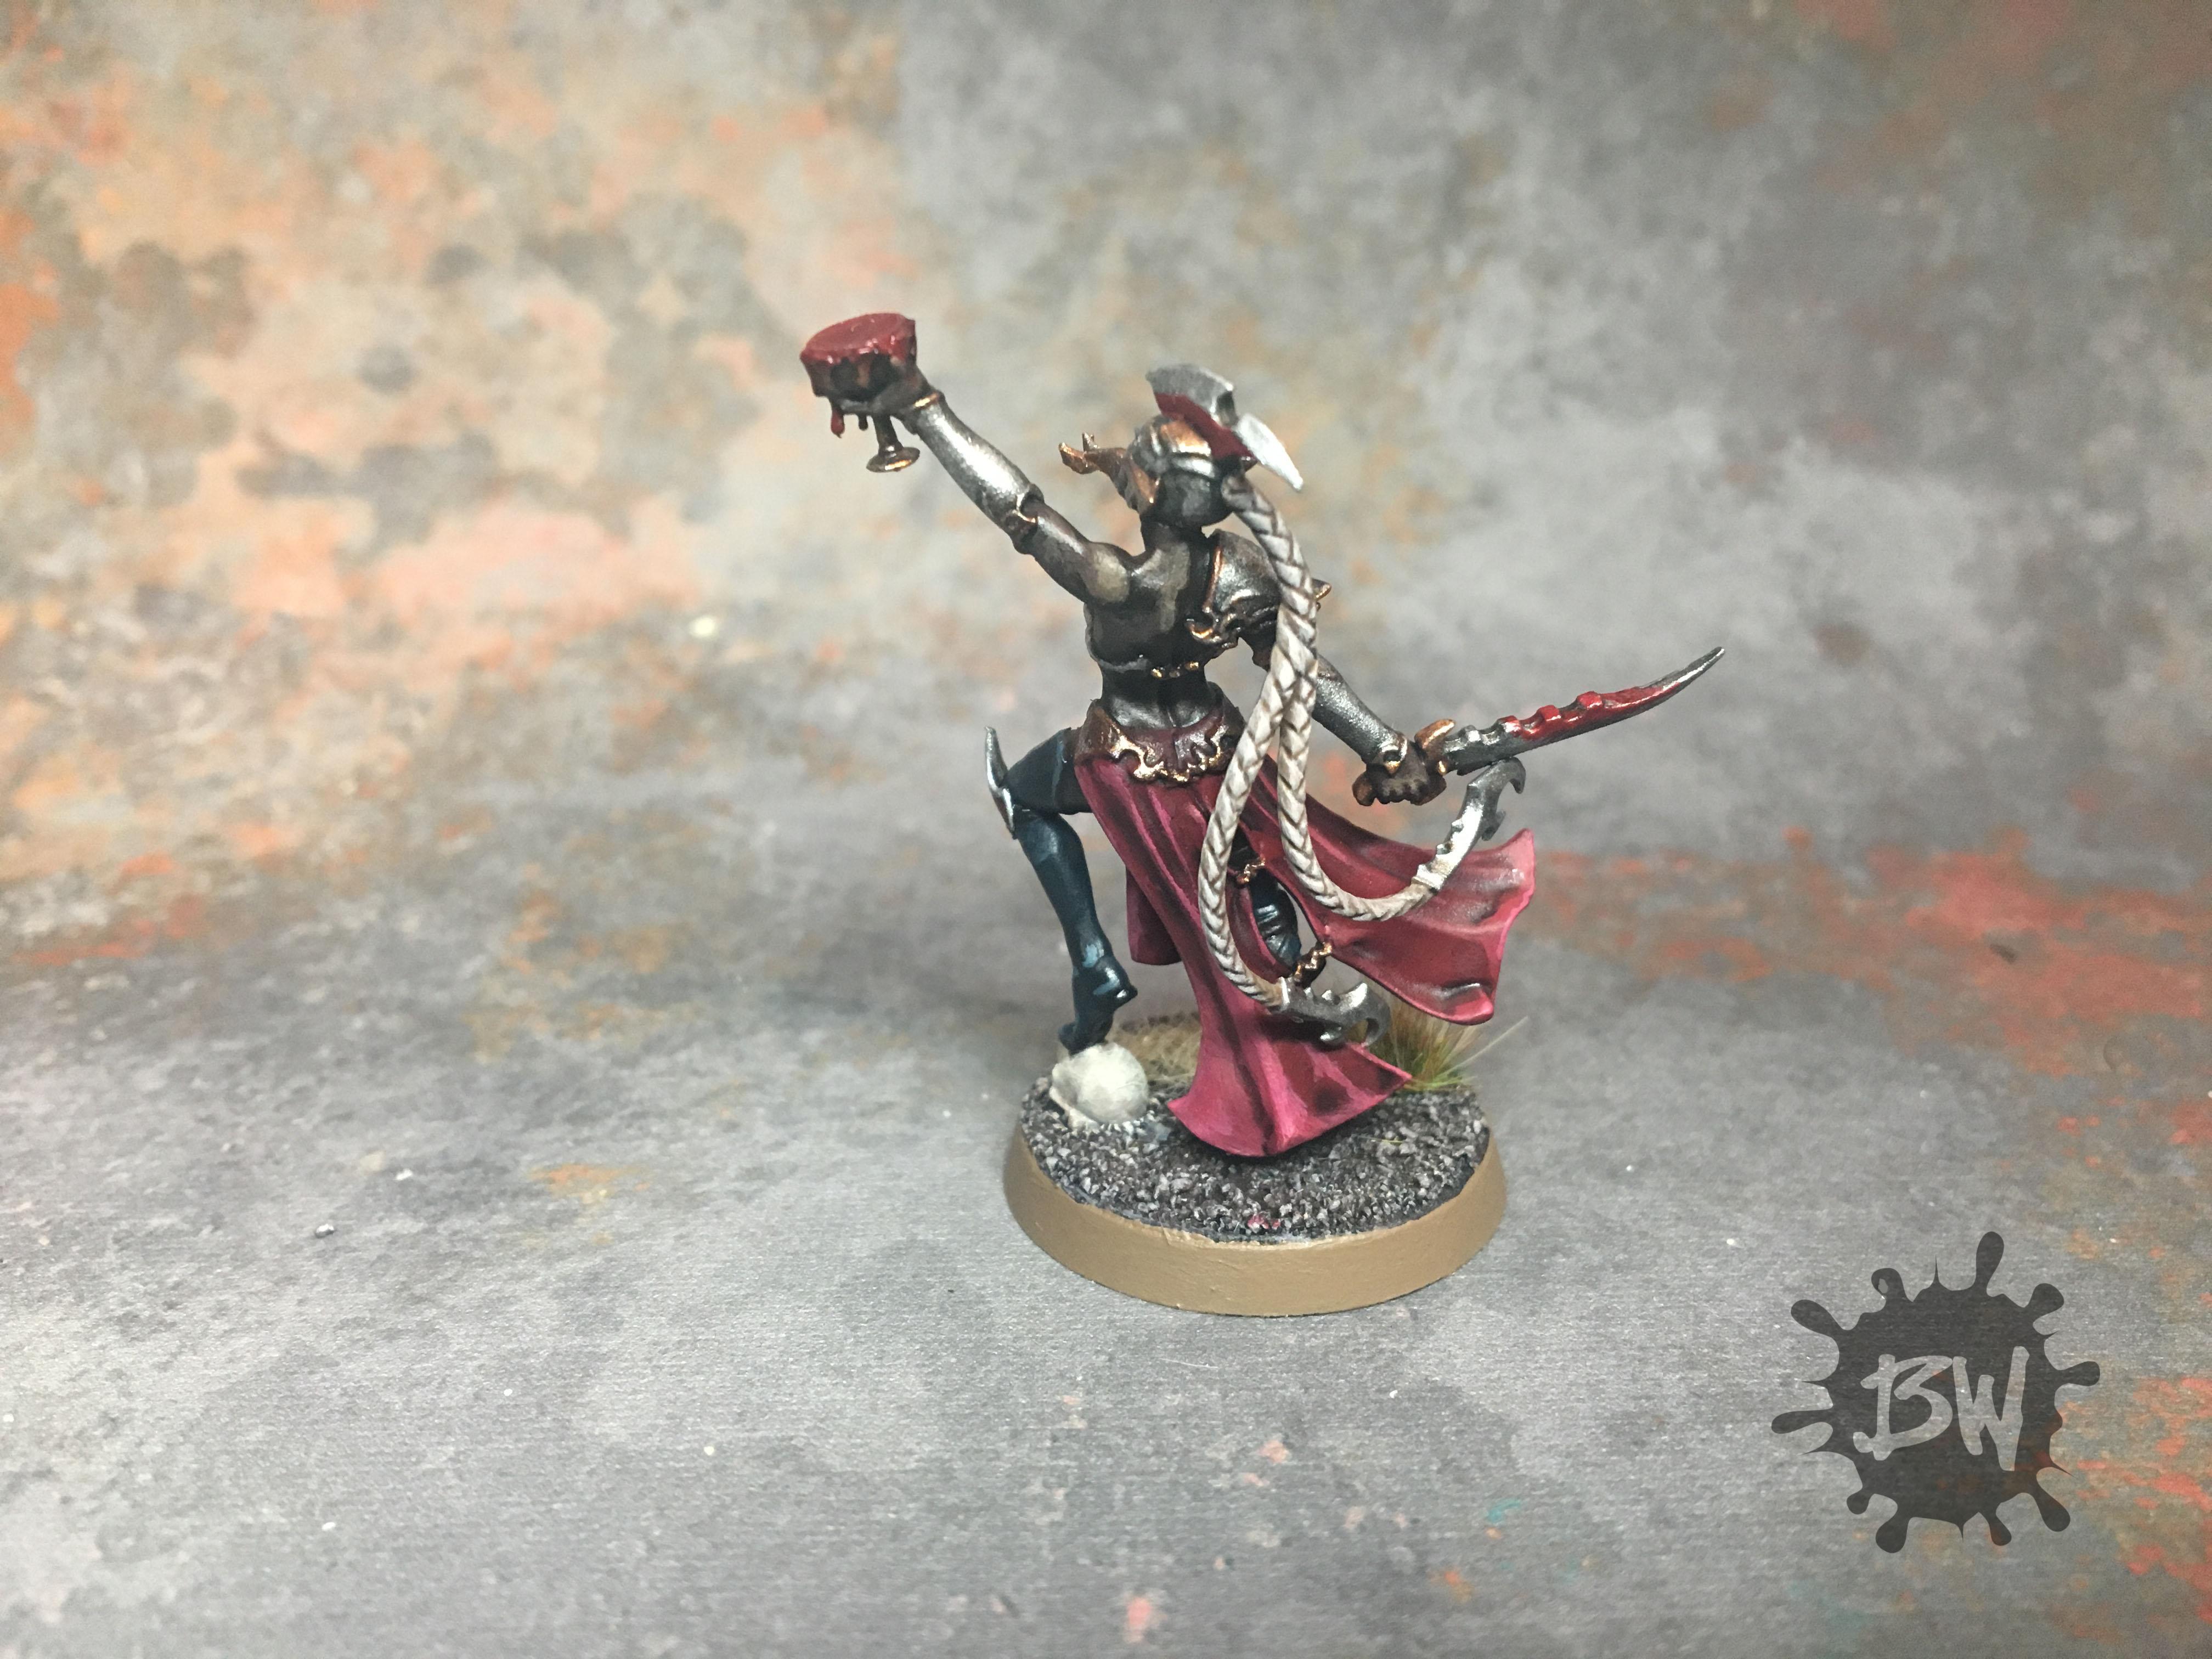 Age Of Sigmar, Bw, Commission, Daughters Of Khaine, Games Workshop, Hag Queen, Order, Painting, Warhammer Fantasy